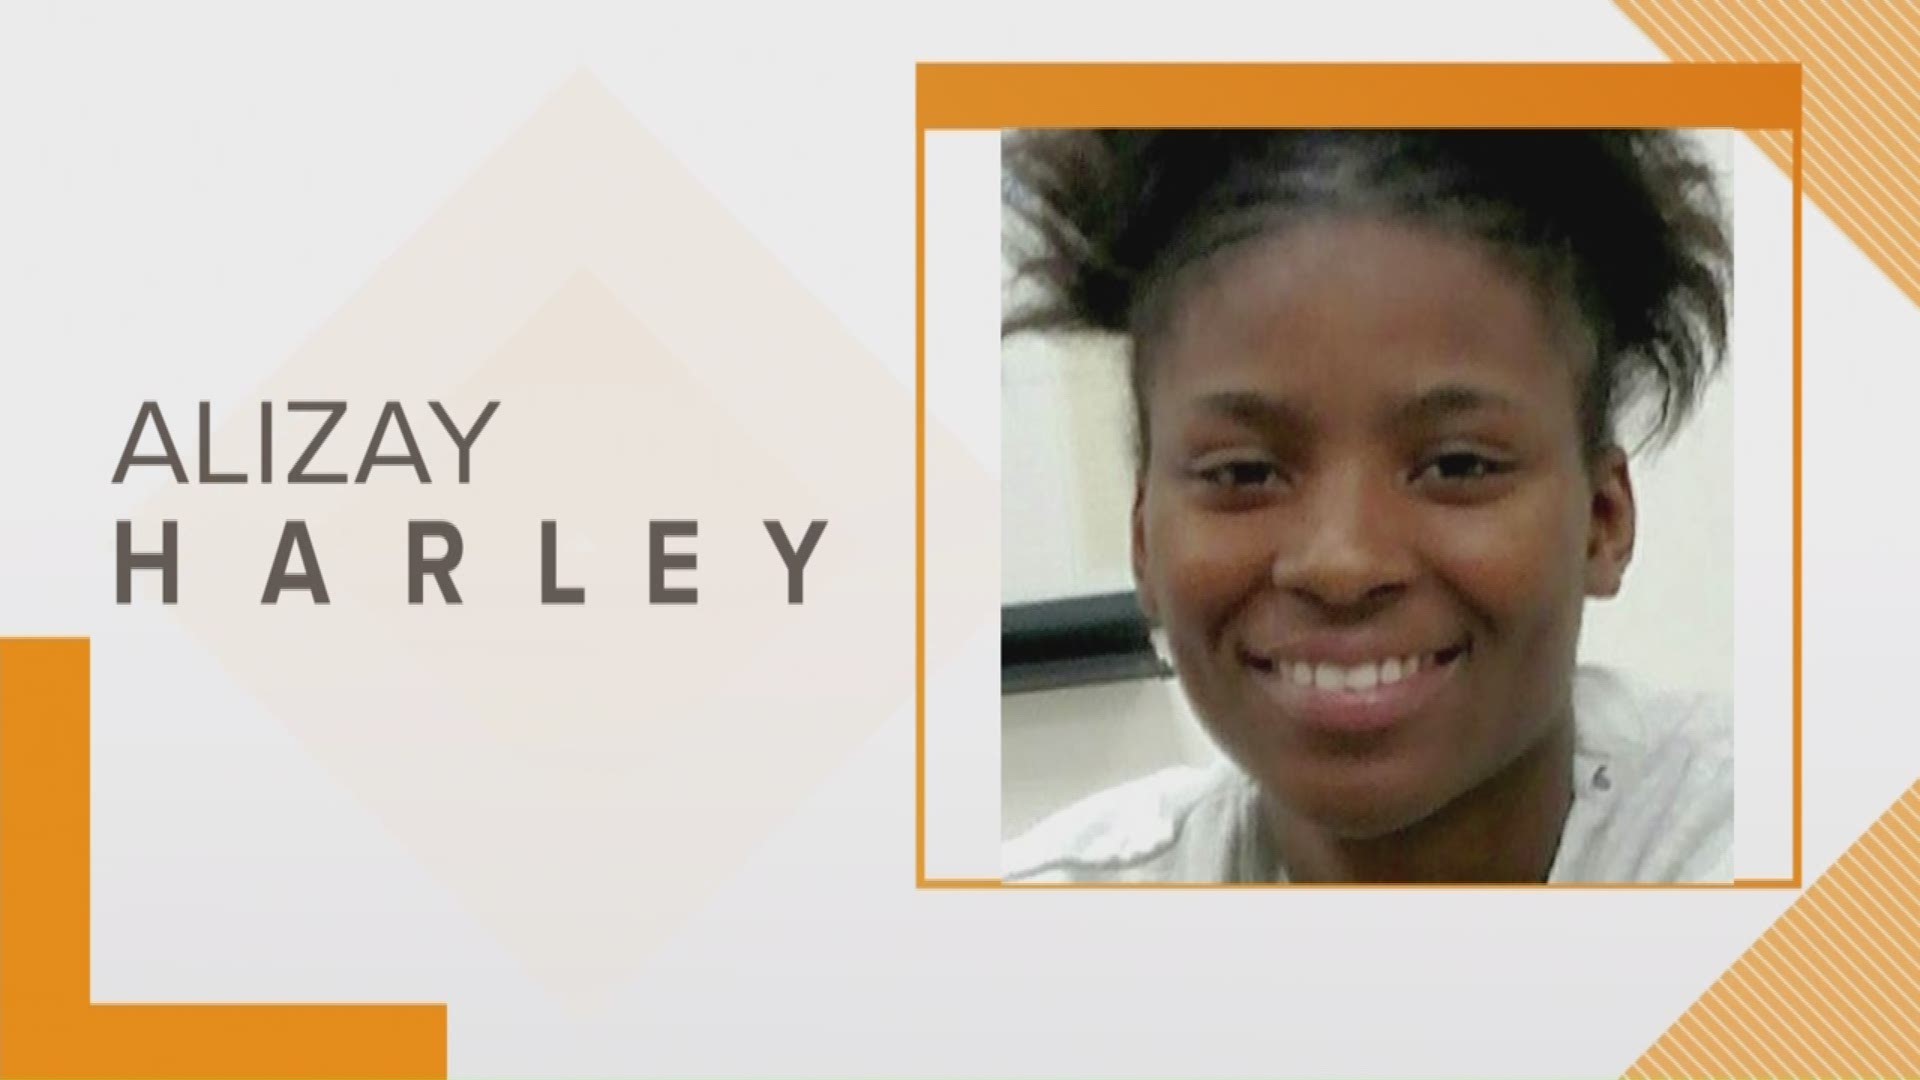 he National Center for Missing and Exploited Children is asking for the public's help to find a South Carolina teenager who's been missing for almost a year.